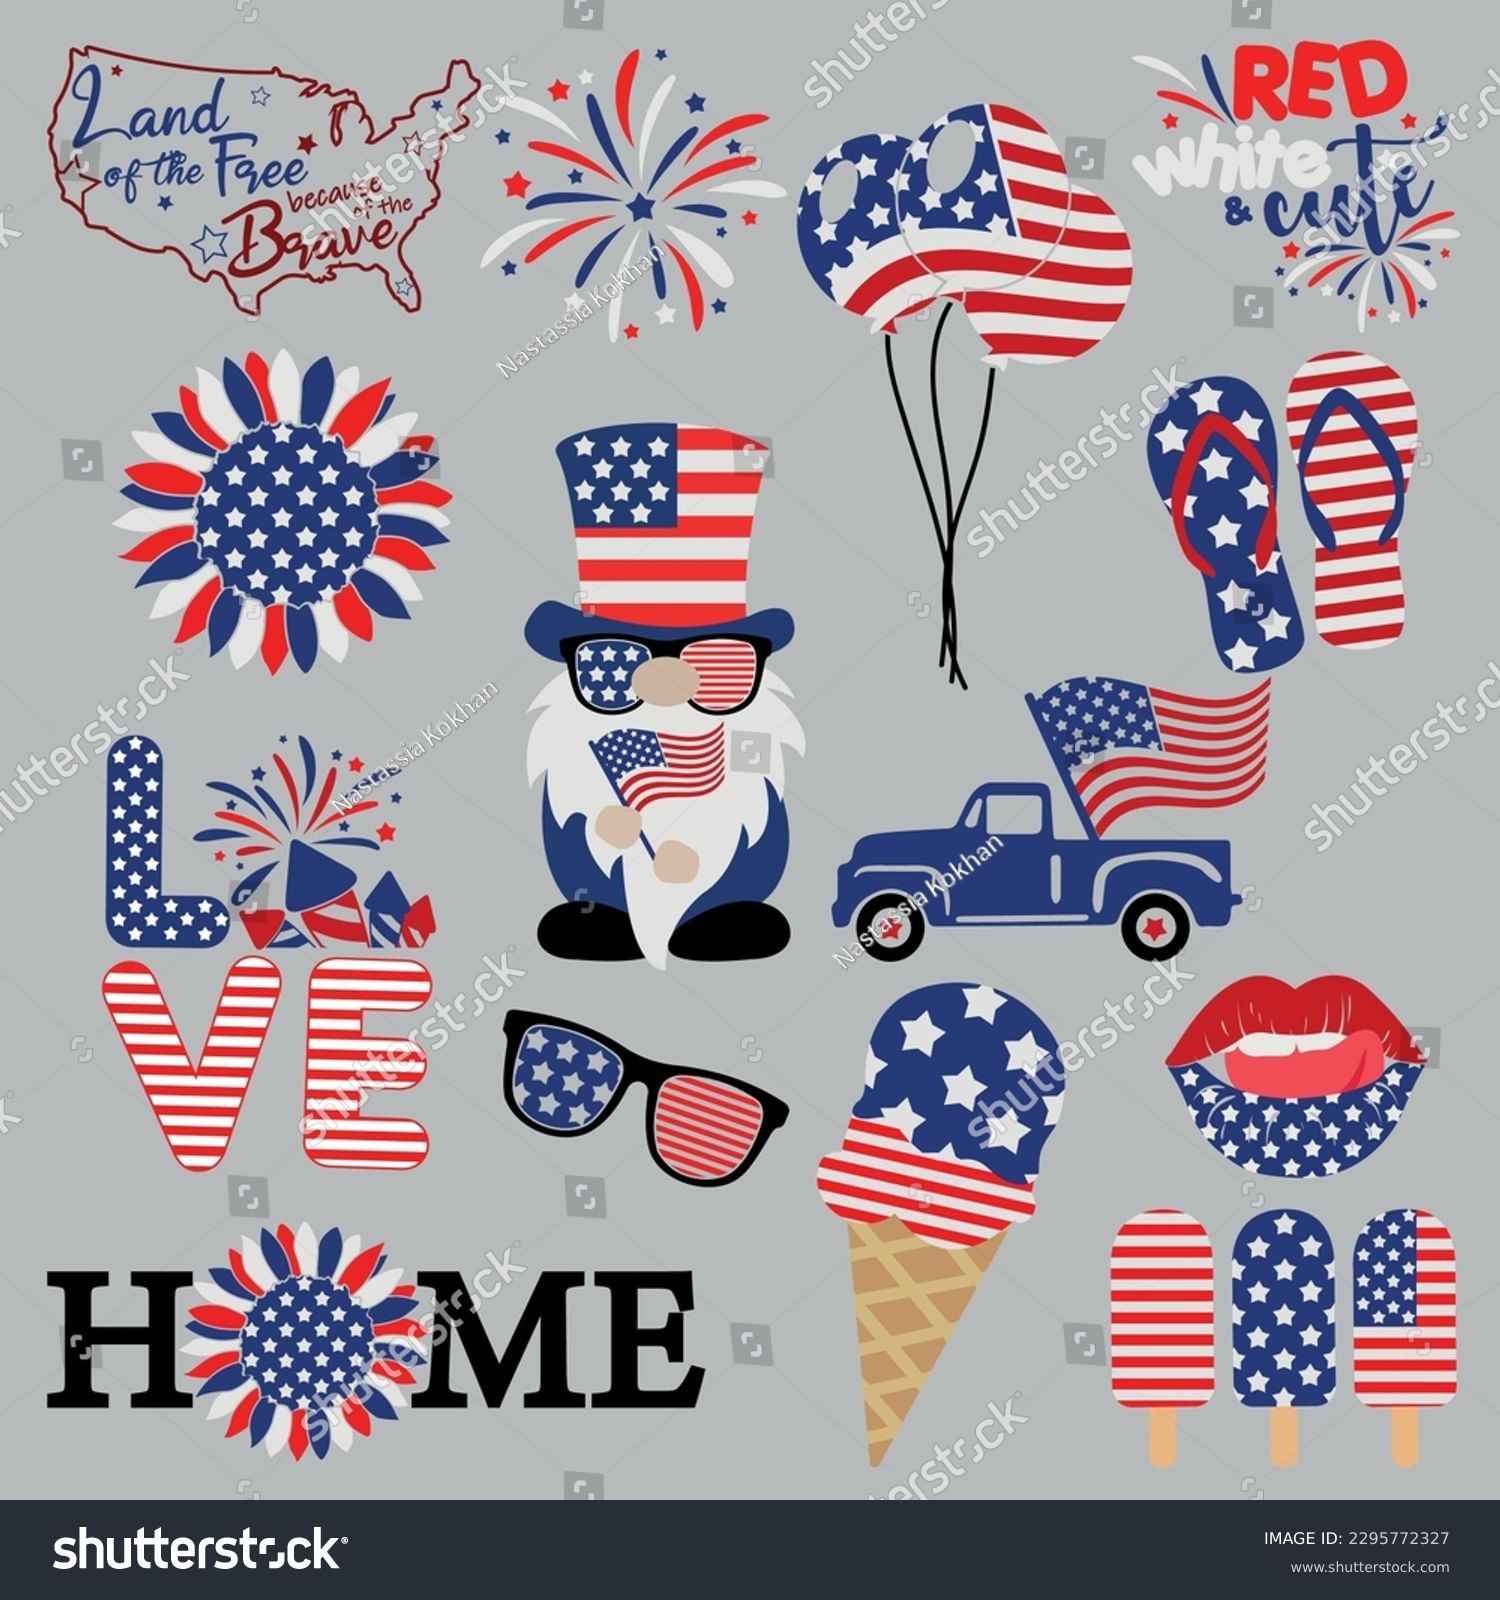 SVG of 4th of July Svg vector Illustration Bundle. Independence day party decor with stars and stripes. Independence day for scrapbooking, card, shirt. 4 th of July bundle svg